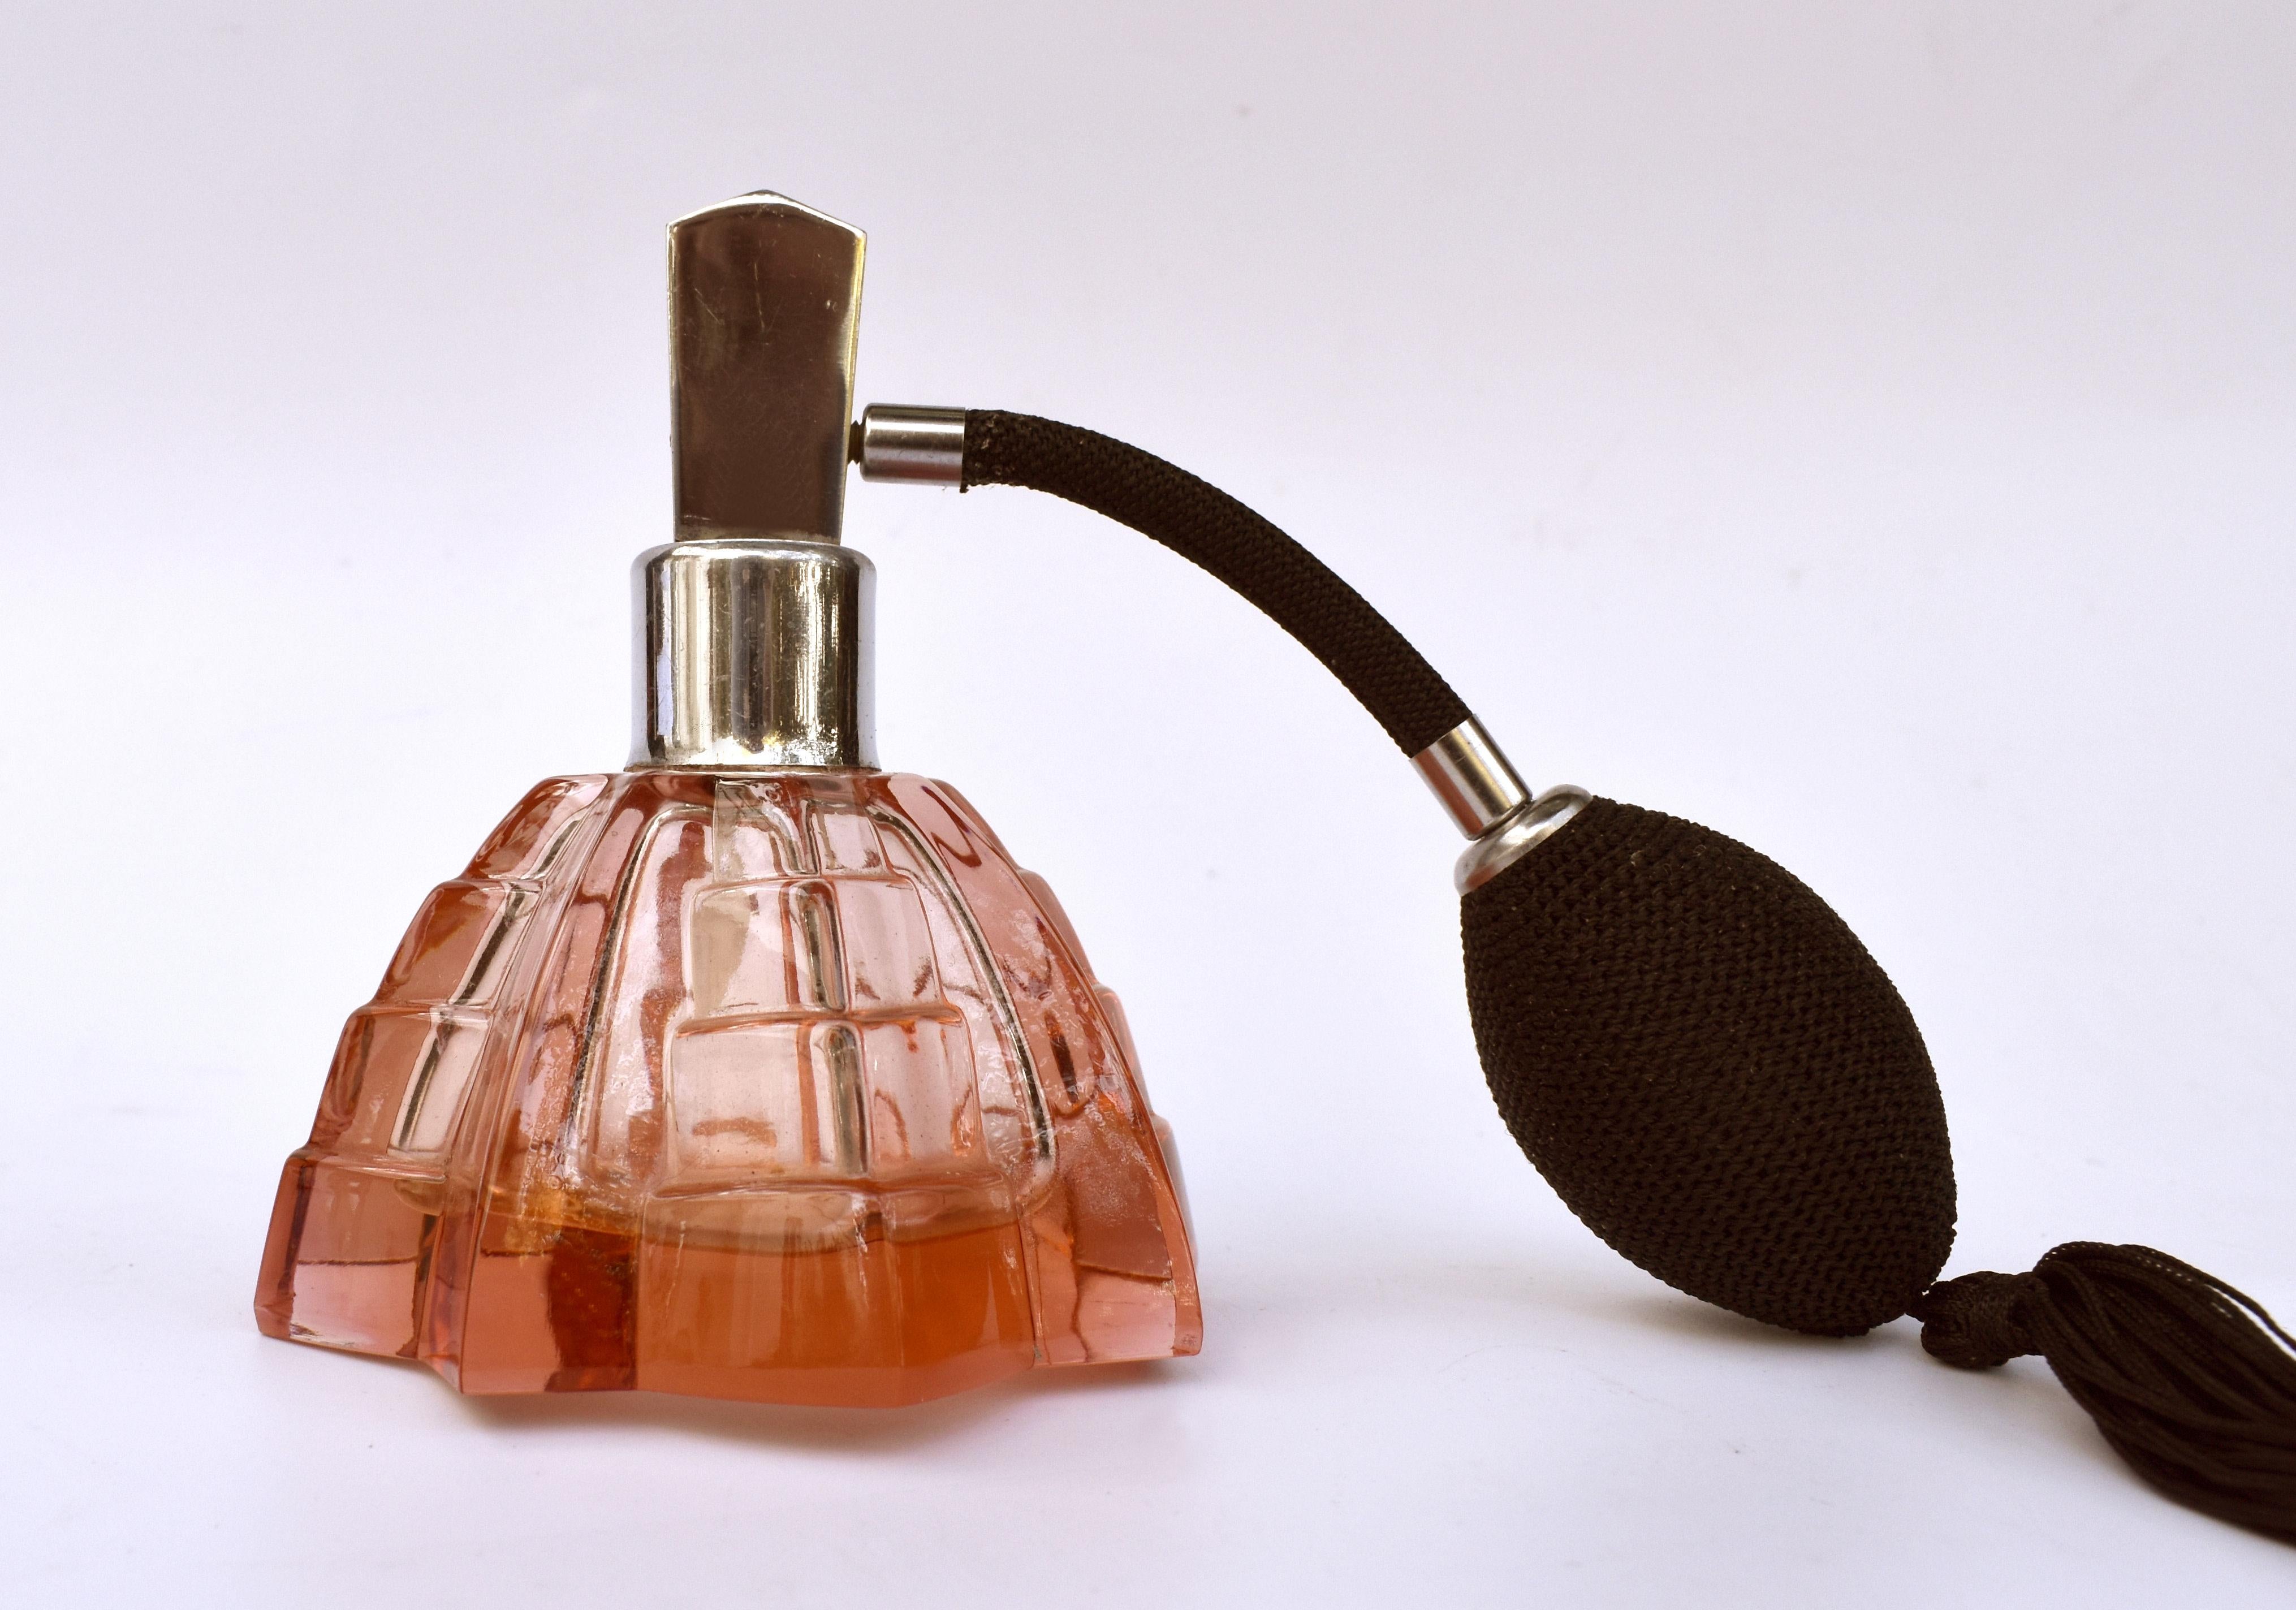 This fabulous Art Deco atomiser is an absolute delight. Cut glass body with multi angled edges is in a beautiful pink colour with black silk bulb and tassel. It will look superb on a dressing table or bathroom shelf. Good vintage condition, dating